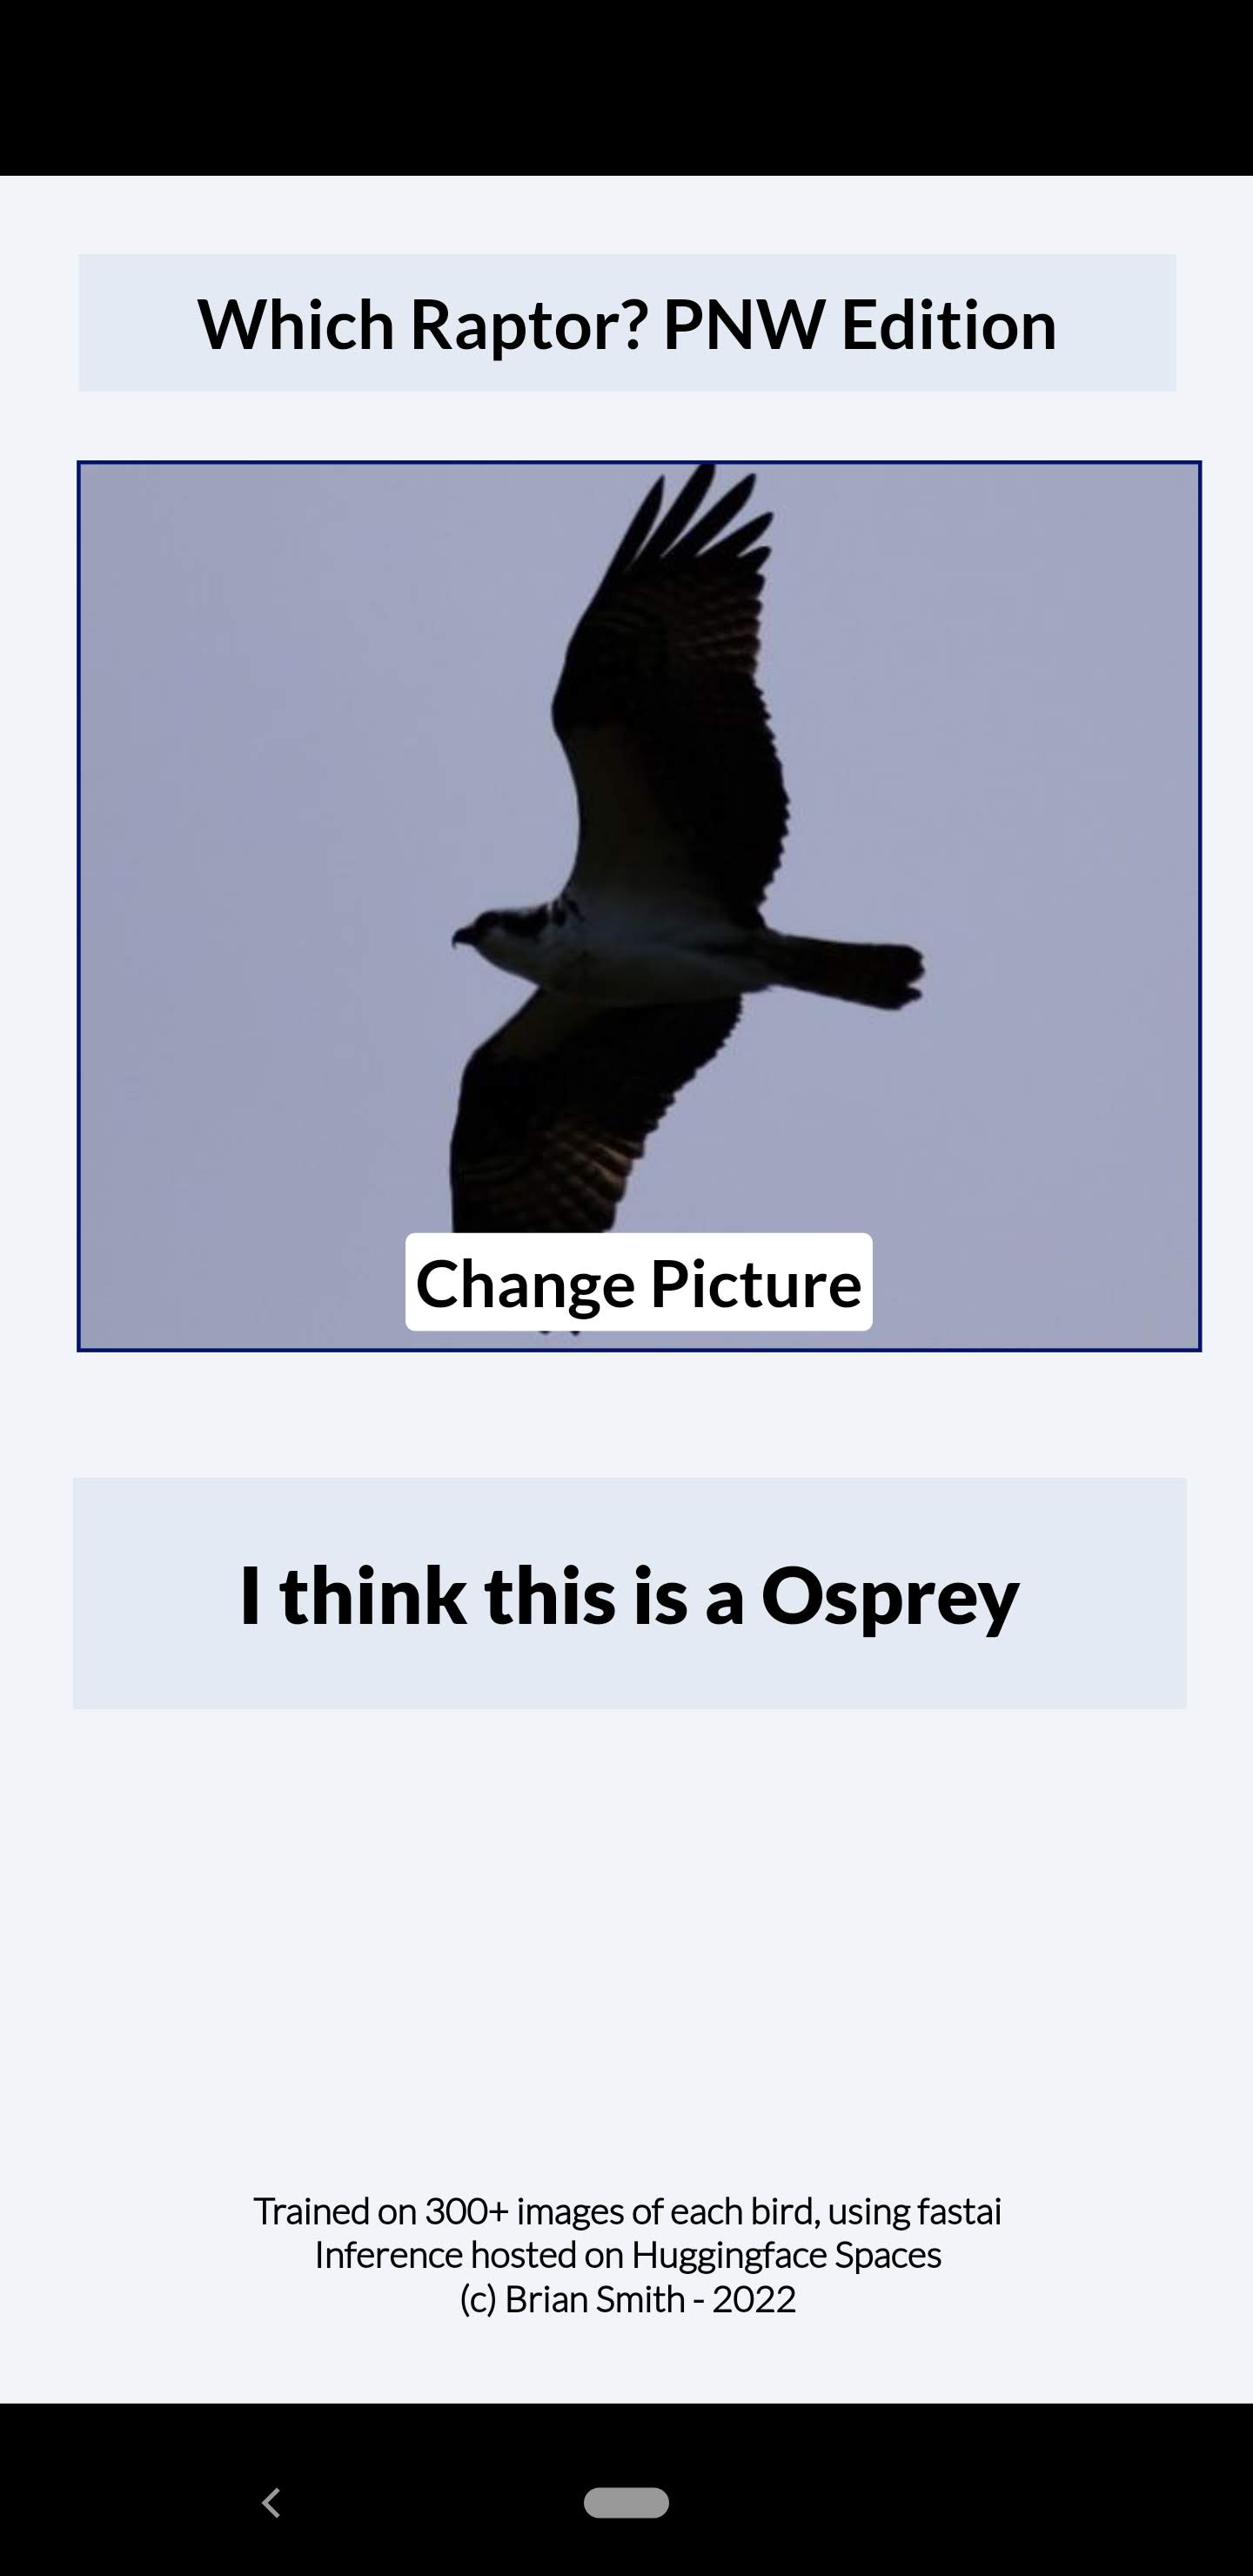 The mobile app - and a good ID of an Osprey